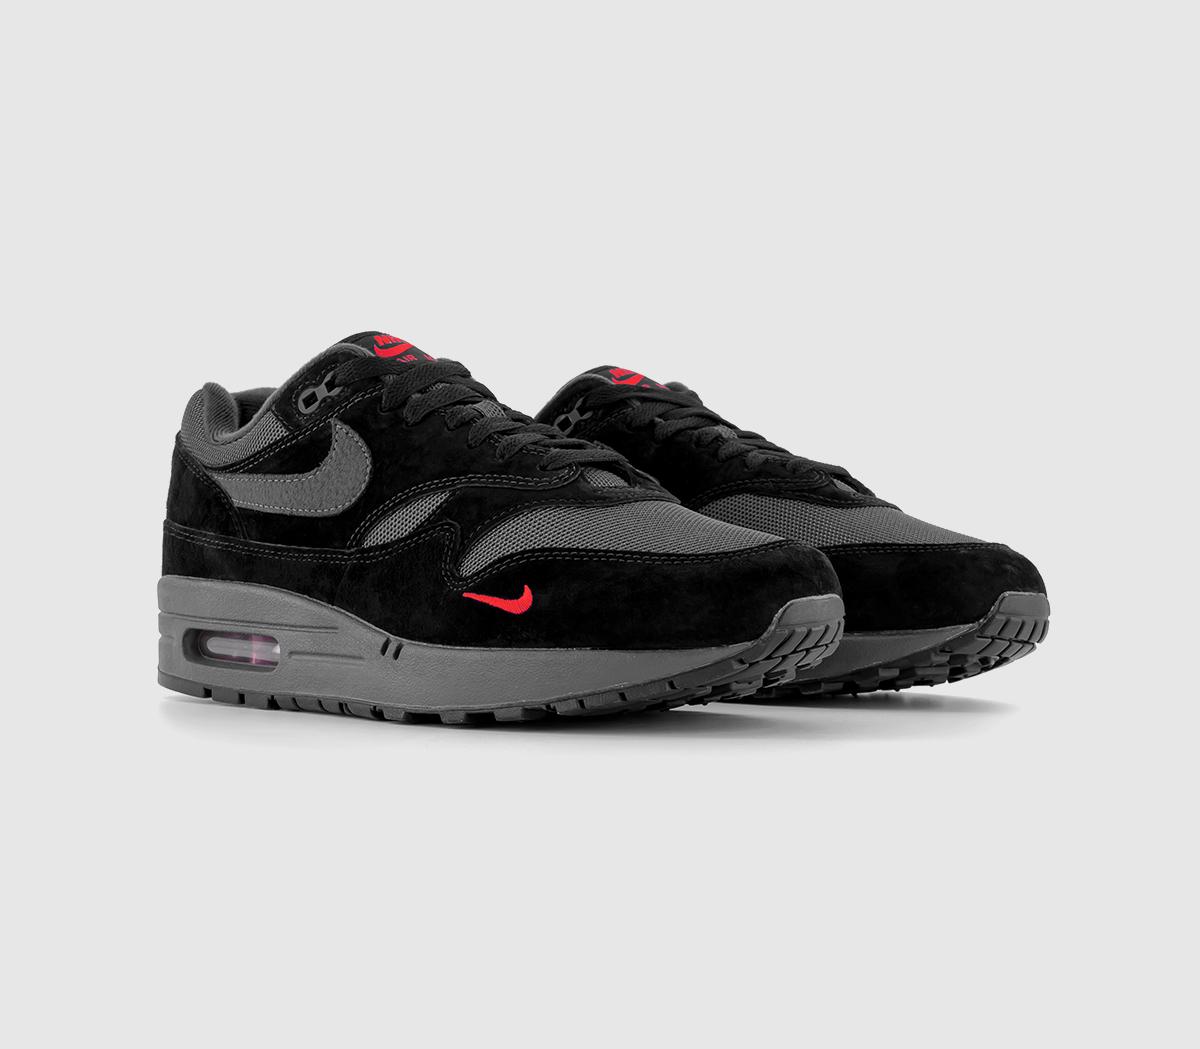 Nike Air Max 1 Trainers Black Anthracite University Red, 9